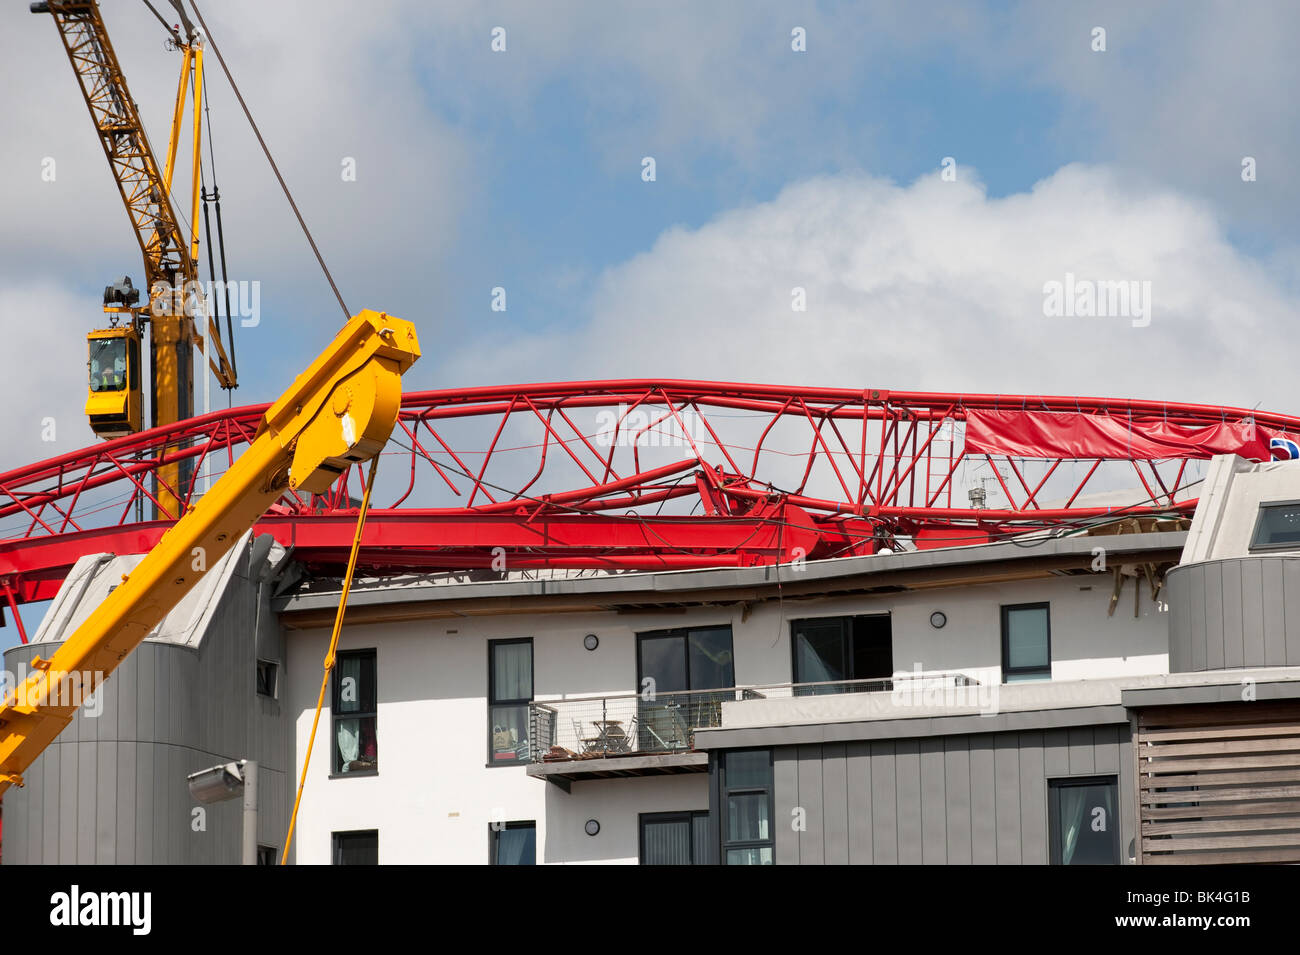 Tower crane collapsed fallen onto roof of apartment block being lifted off by another crane Stock Photo